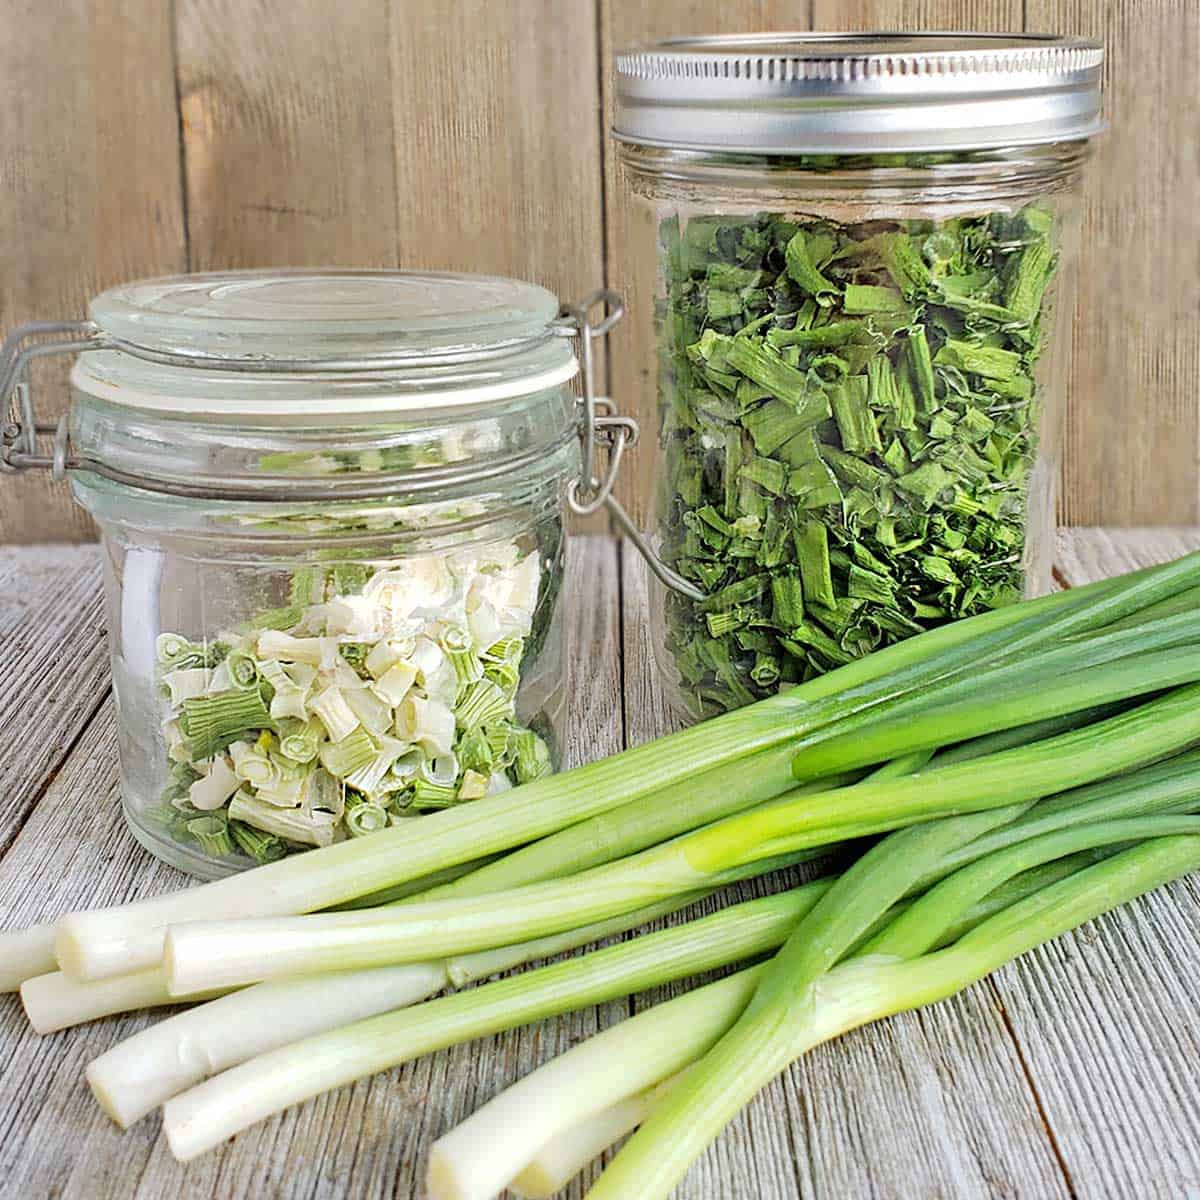 8 Things That Will Give Almost Same Flavor As Green Onions